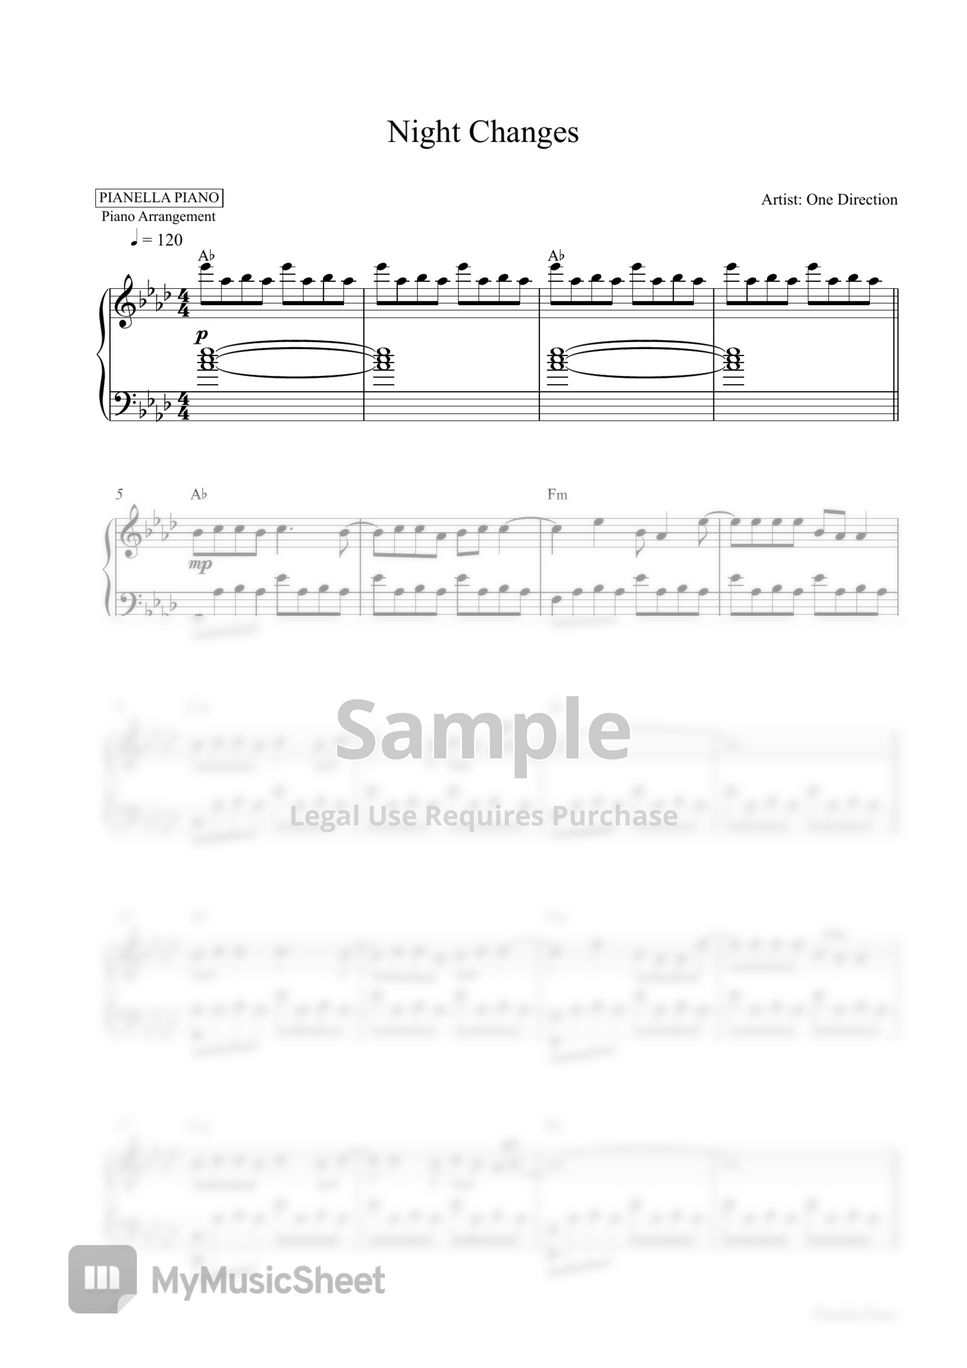 One Direction - Night Changes (Piano Sheet Music) by Pianella Piano